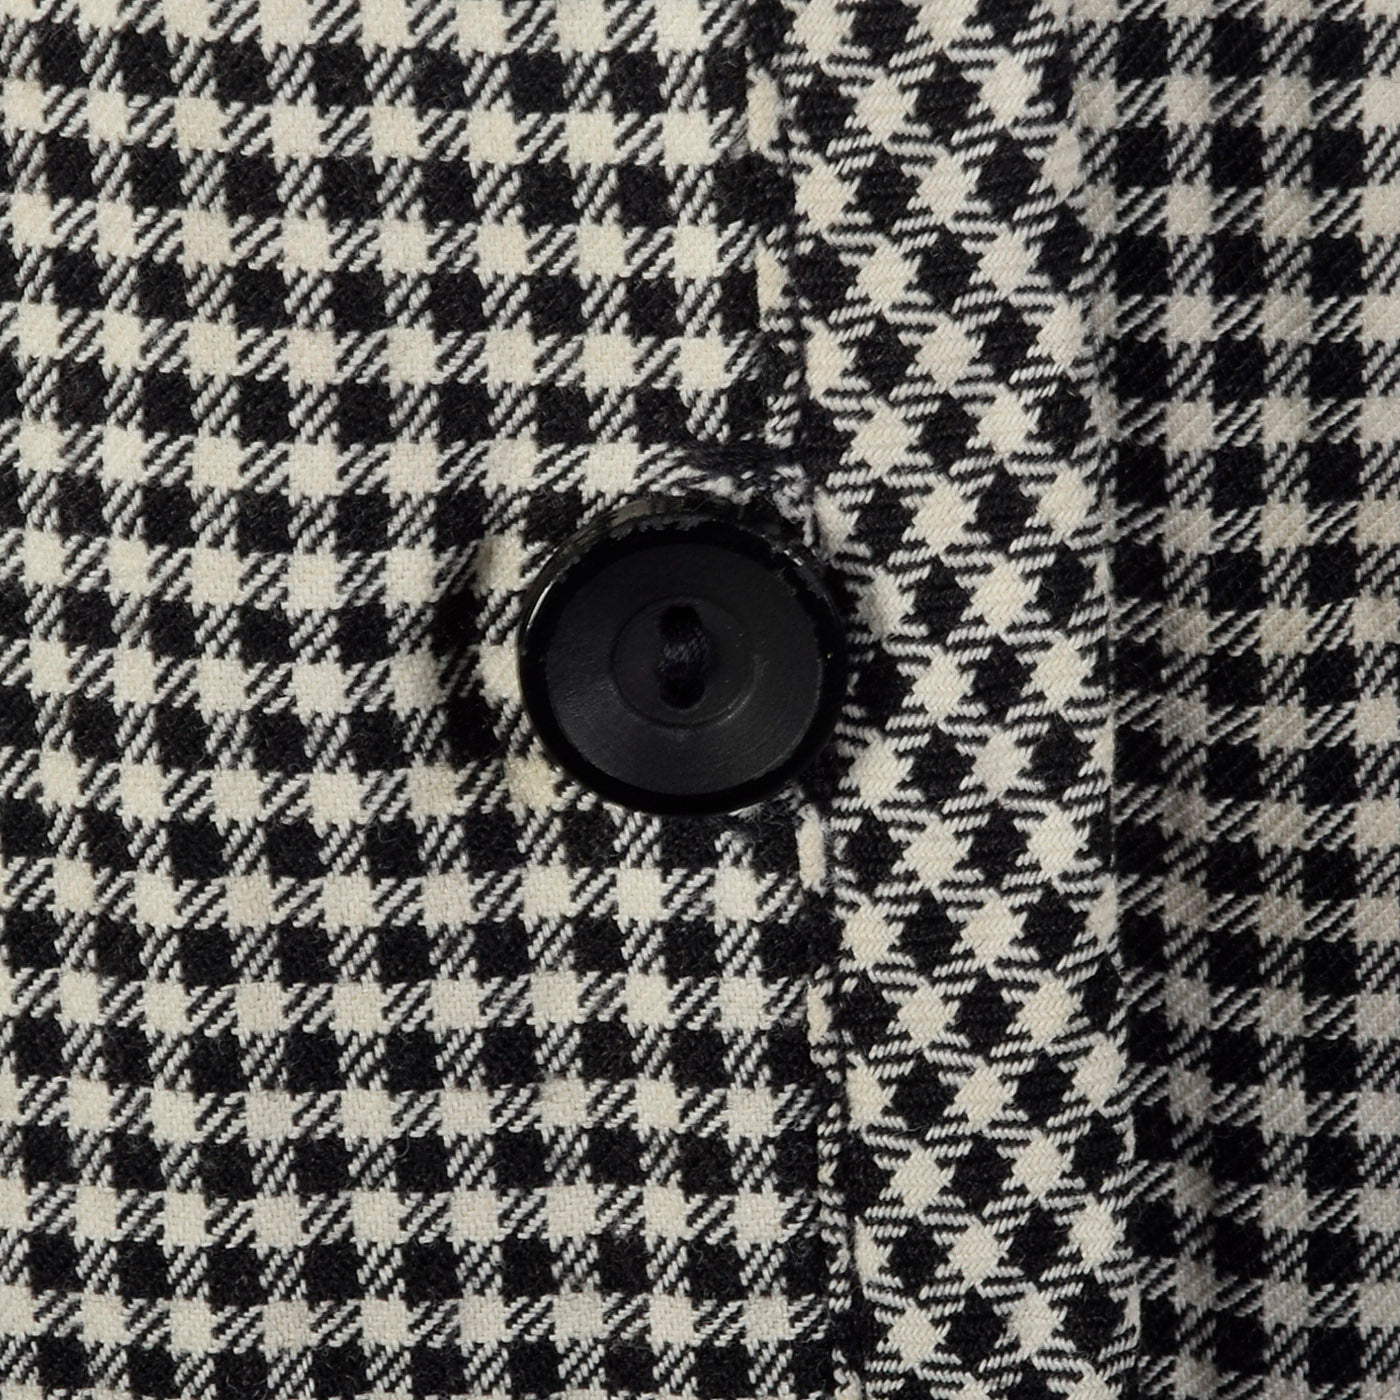 1940s Black and White Check Day Dress